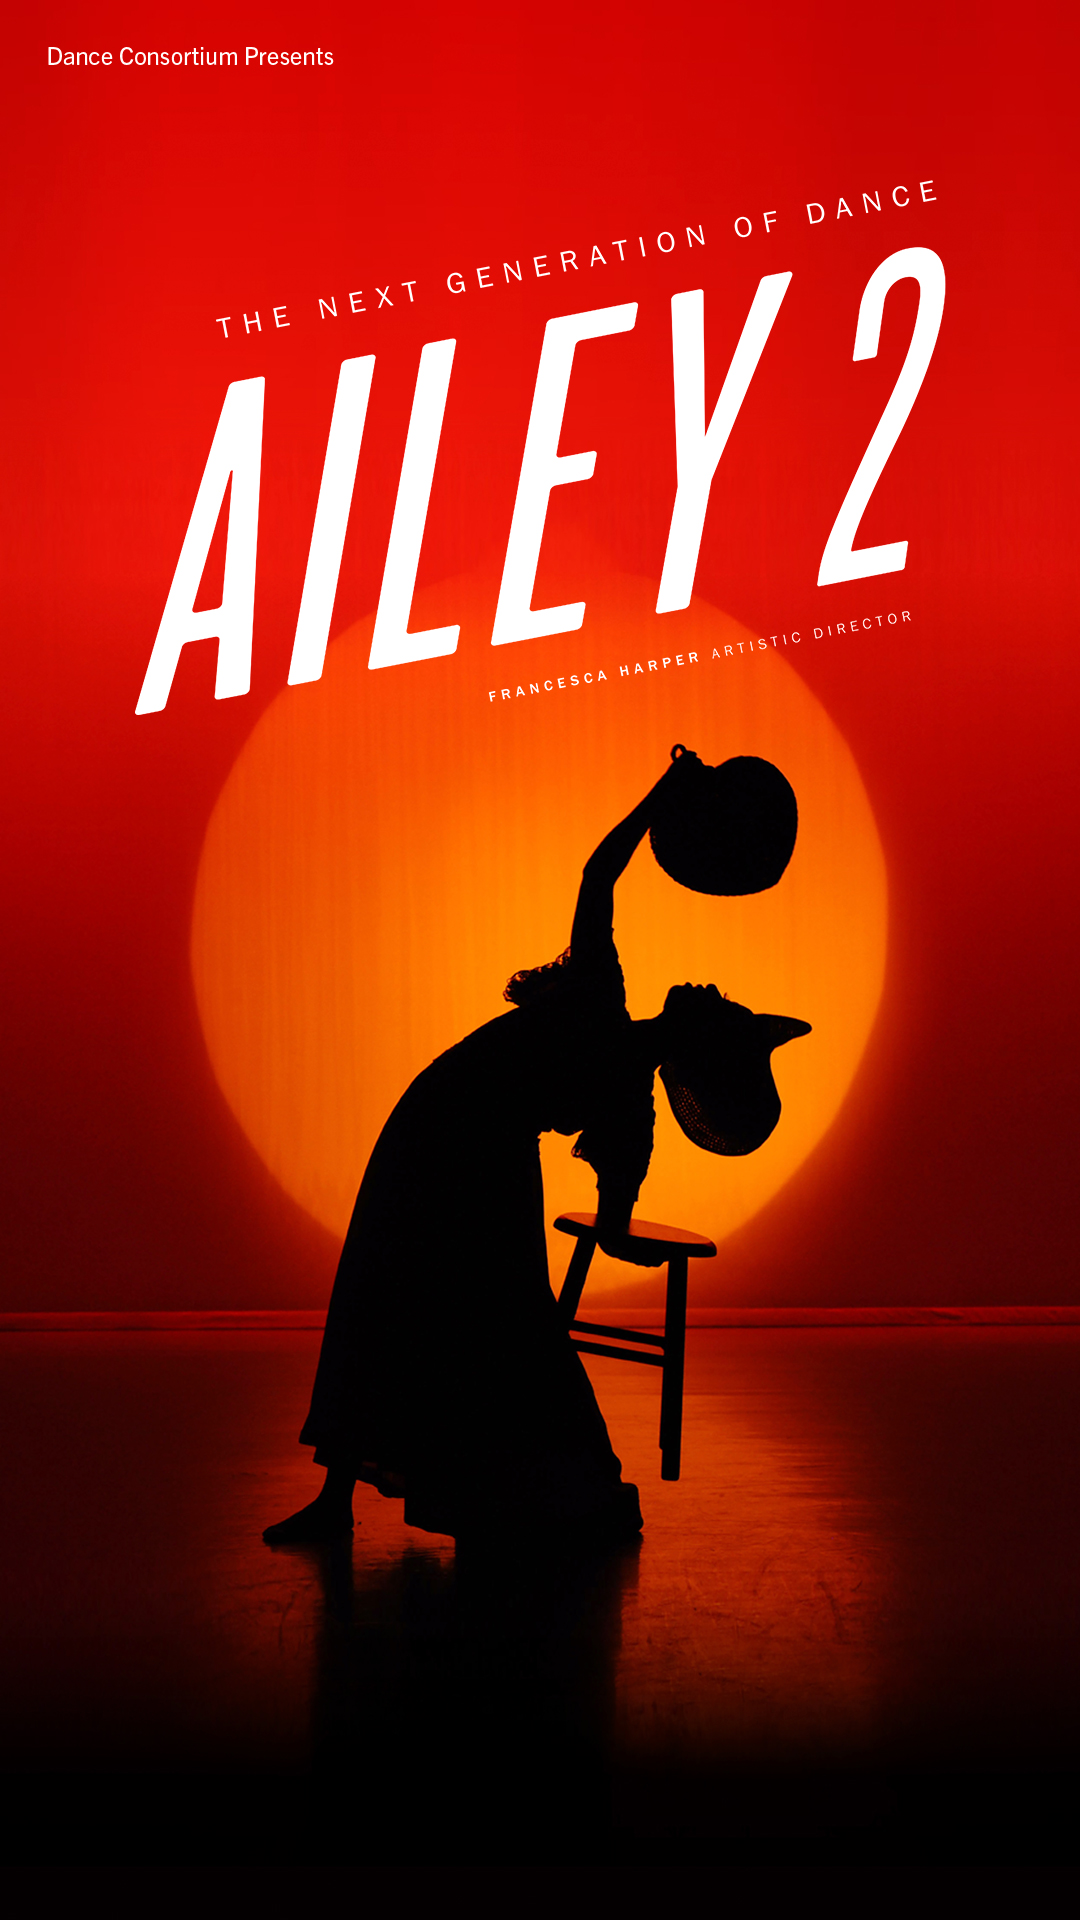 Ailey 2 Poster Show Image